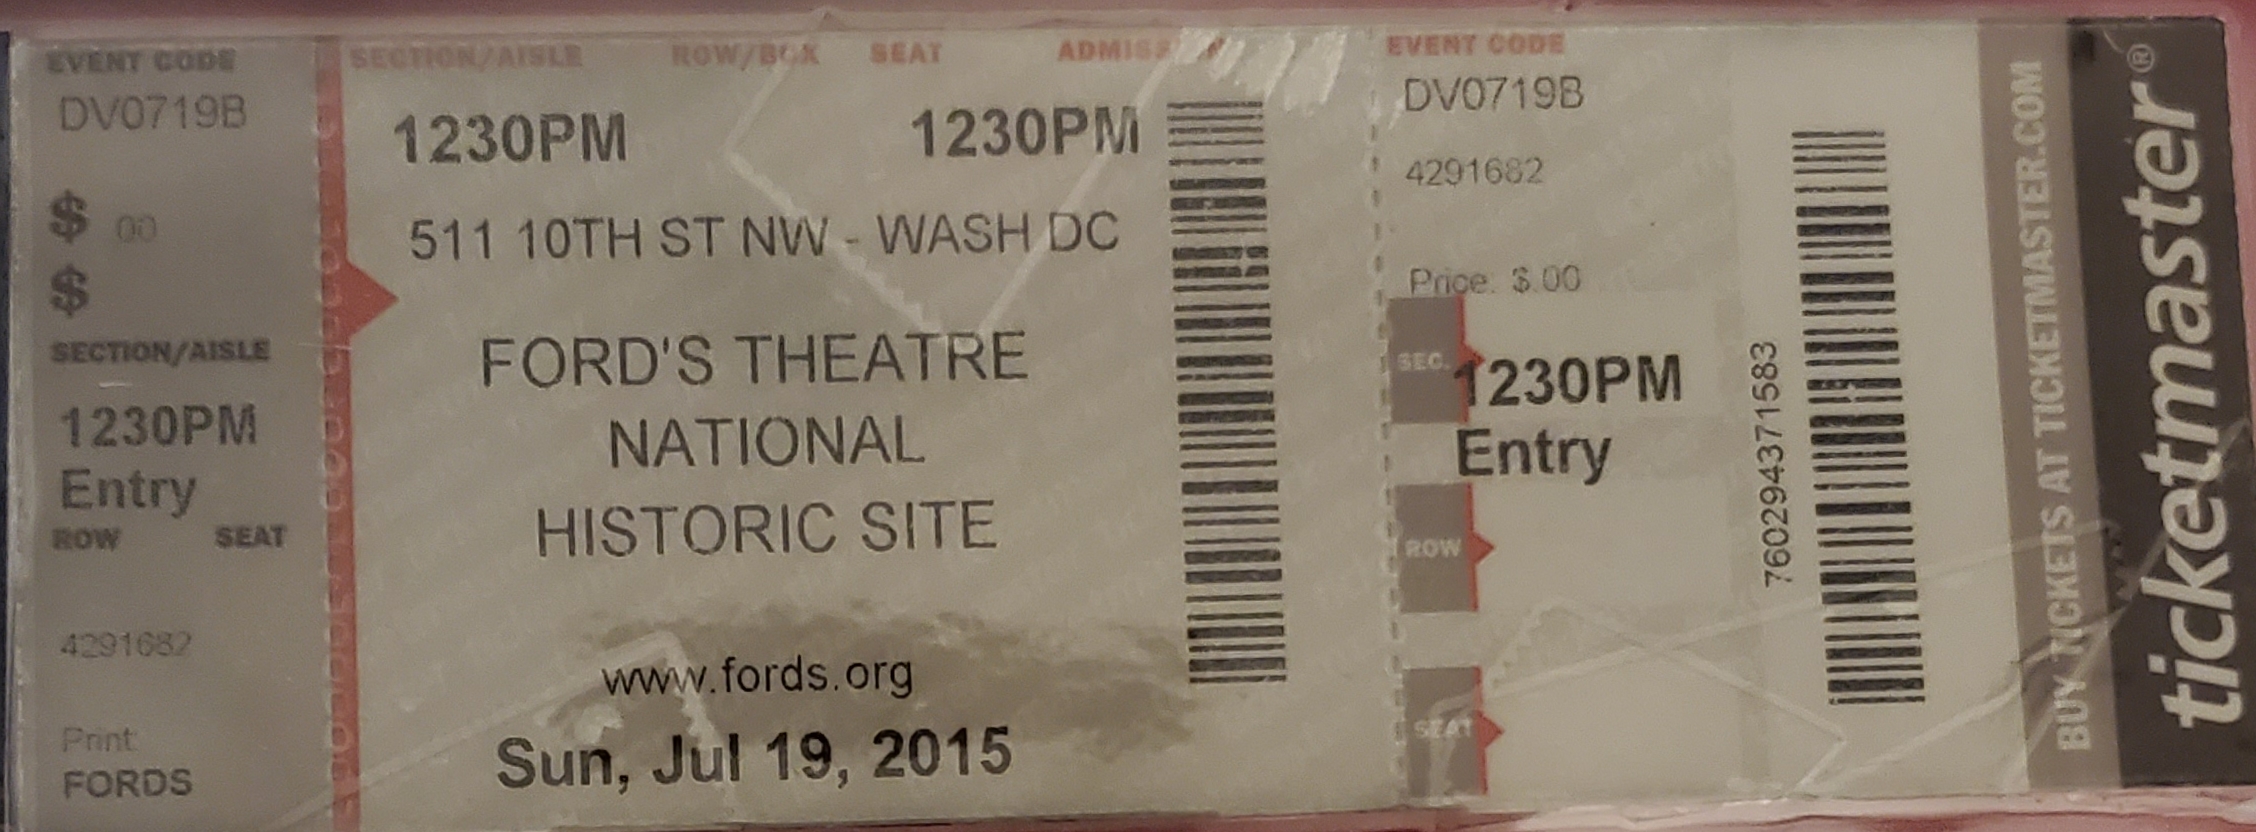 Ticket I Received When Visiting Ford's Theatre